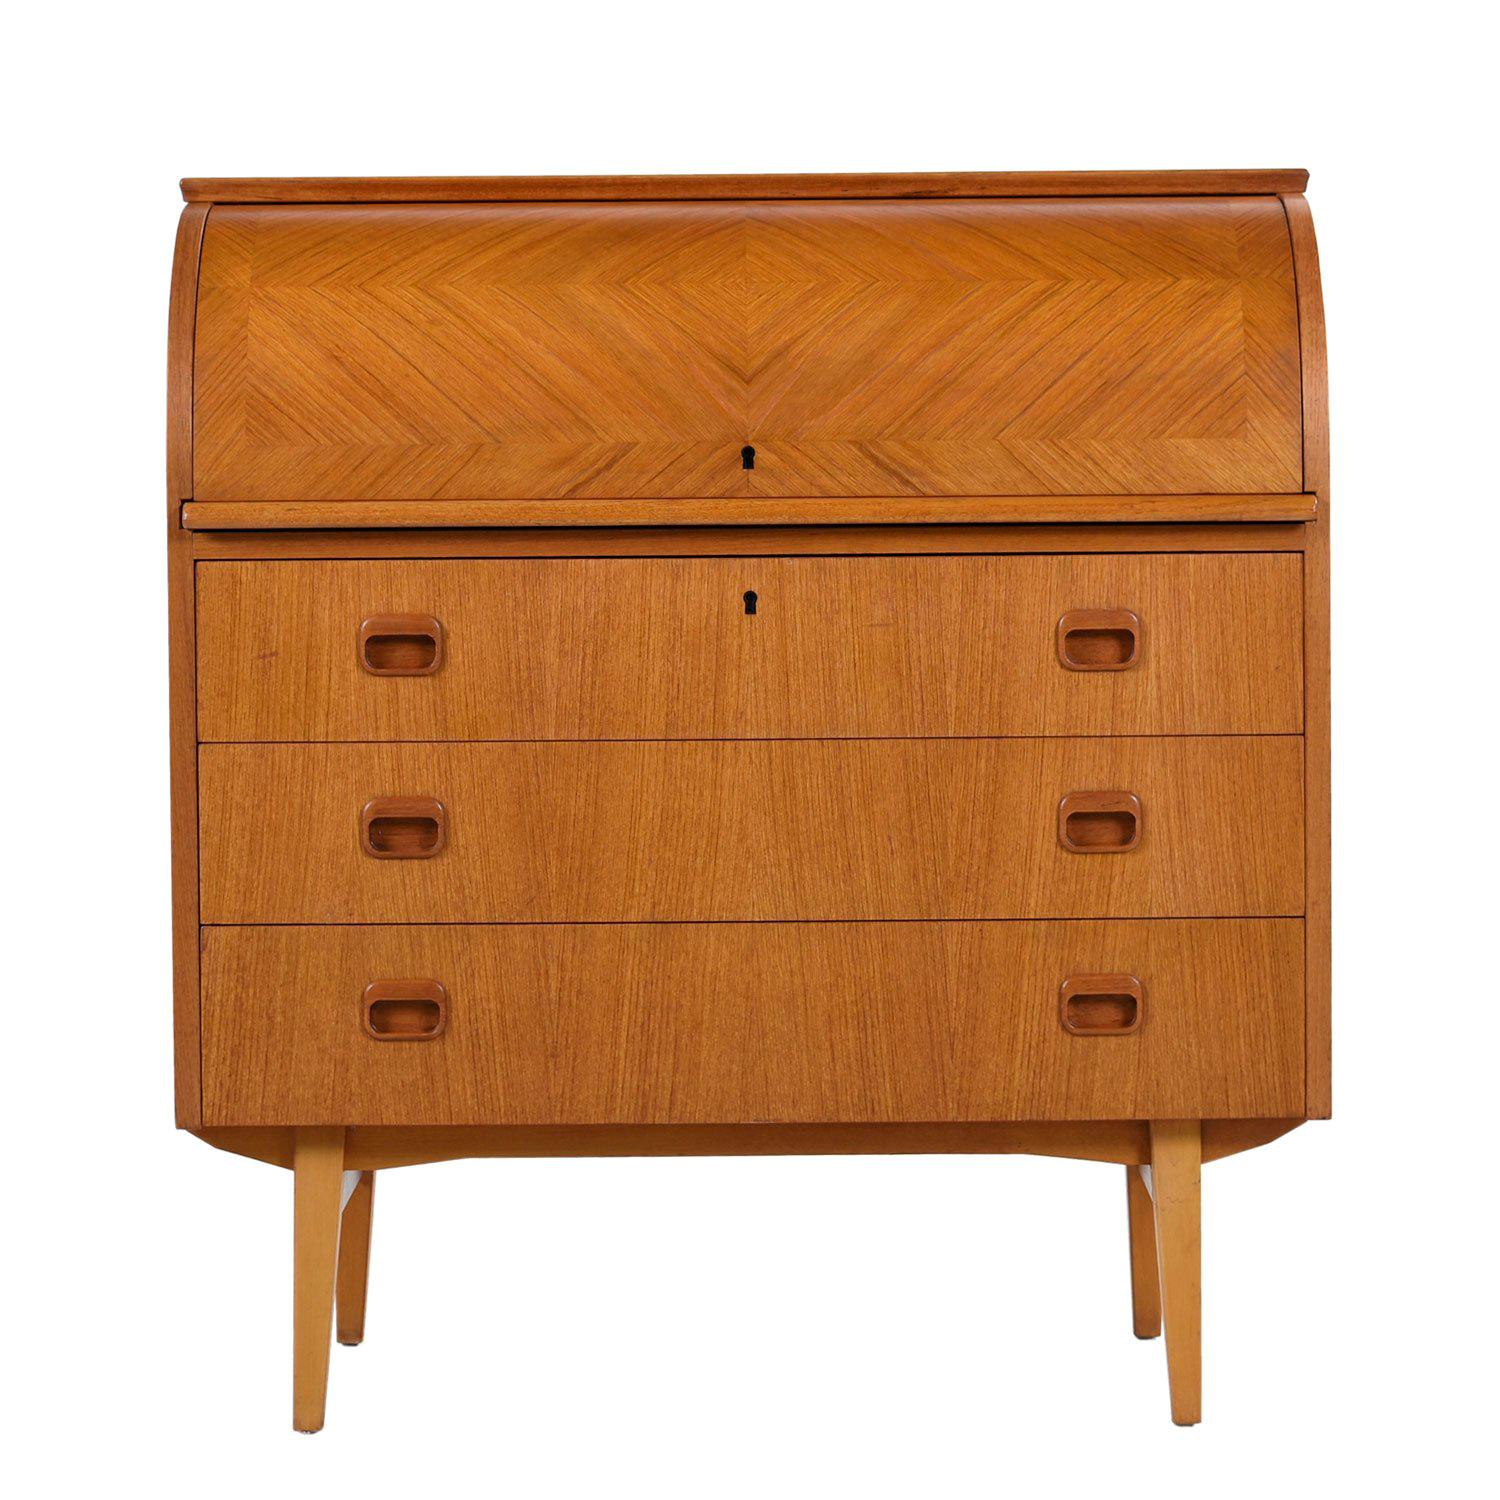 There's a couple of these available out there but none in this excellent condition. Our restoration team performed a relatively passive rehabilitation because this beautiful, honey colored secretary was already in very good condition. We were able